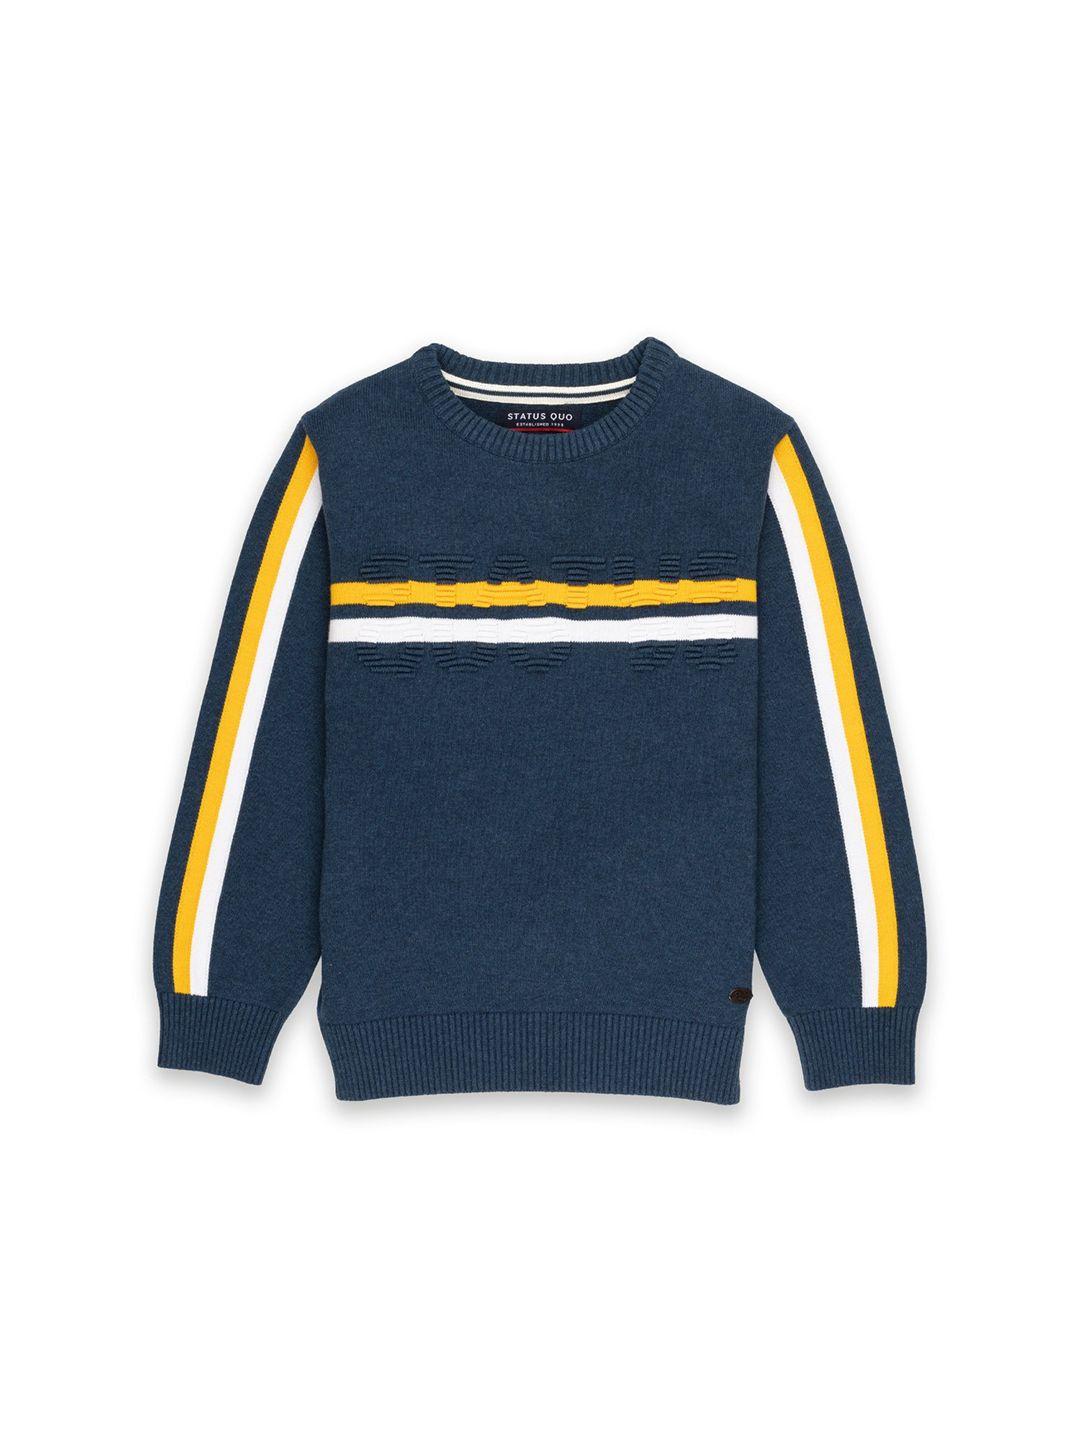 status quo boys navy blue & yellow striped cotton pullover